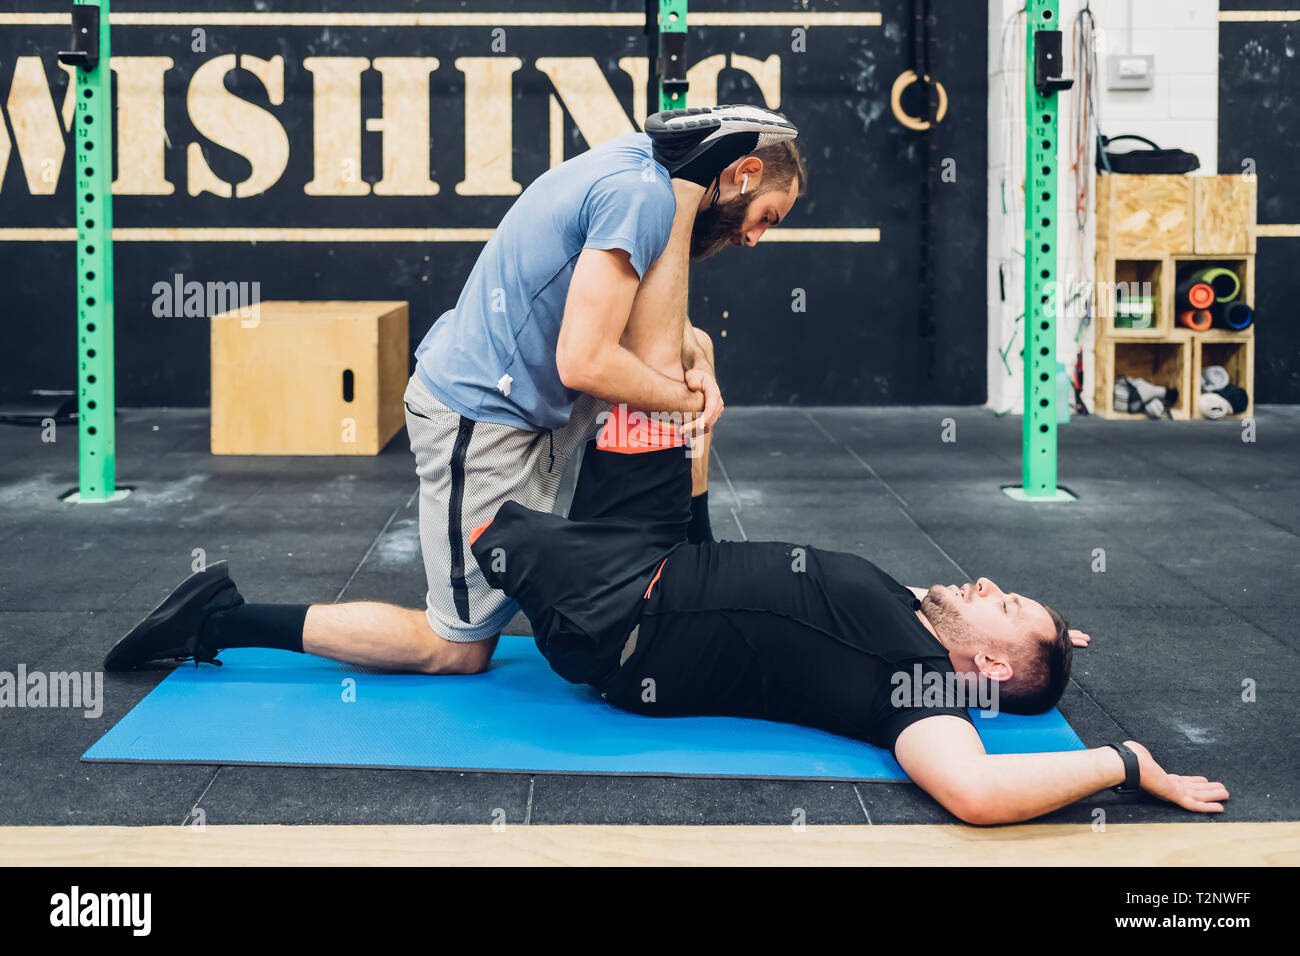 Personal trainer working with man with disability in gym Stock Photo